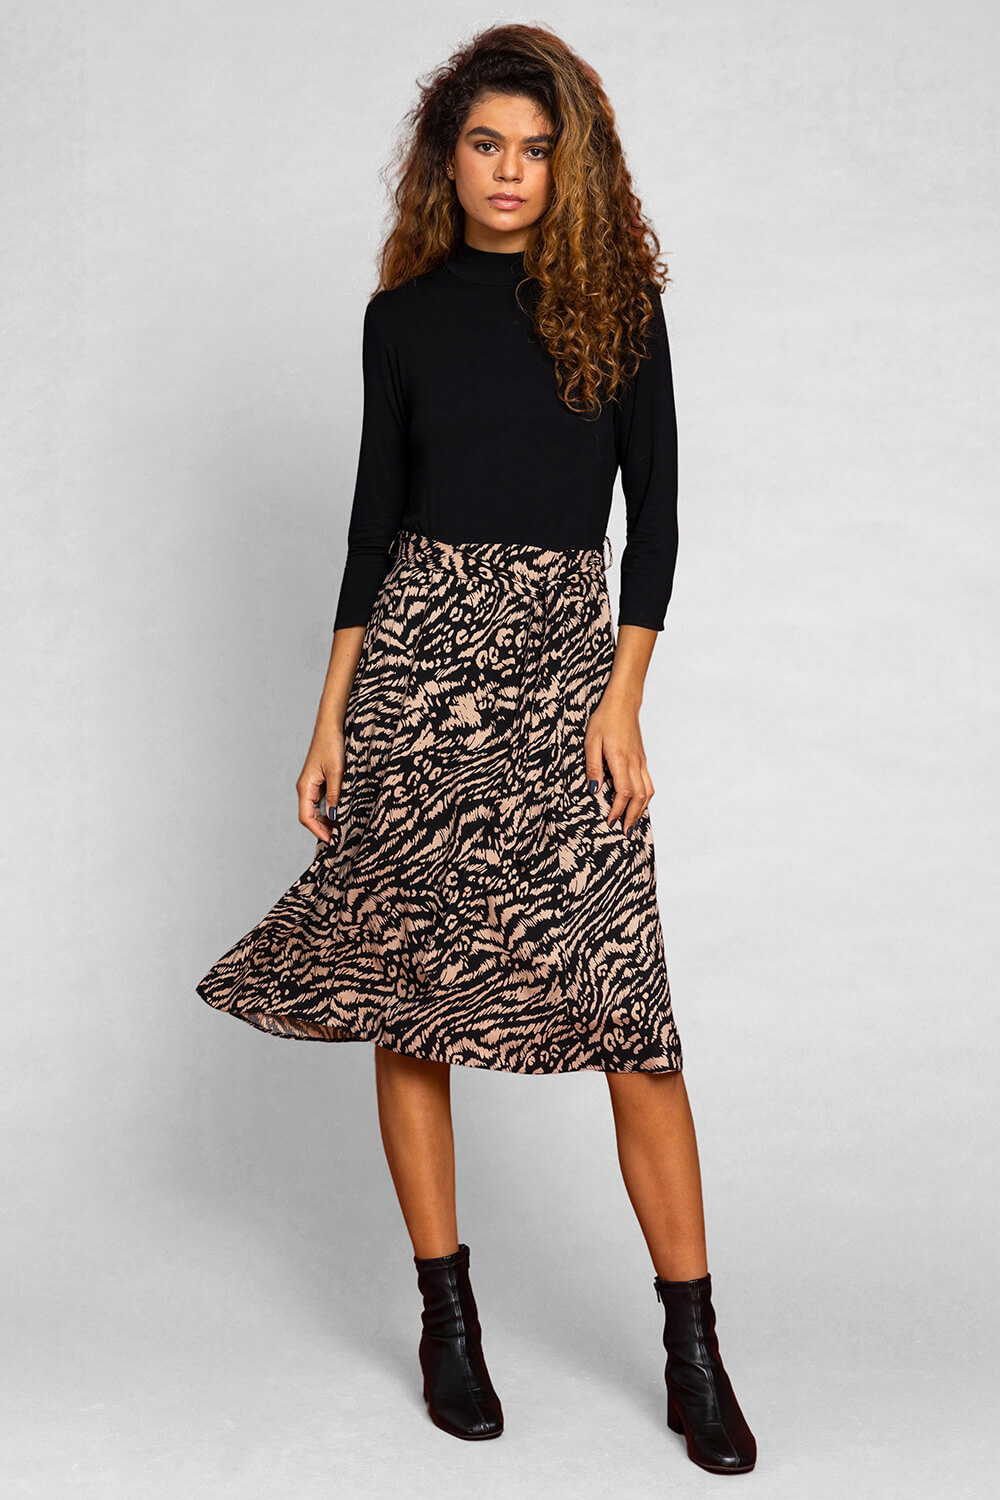 Black Tiger Print Fit And Flare Dress, Image 3 of 5